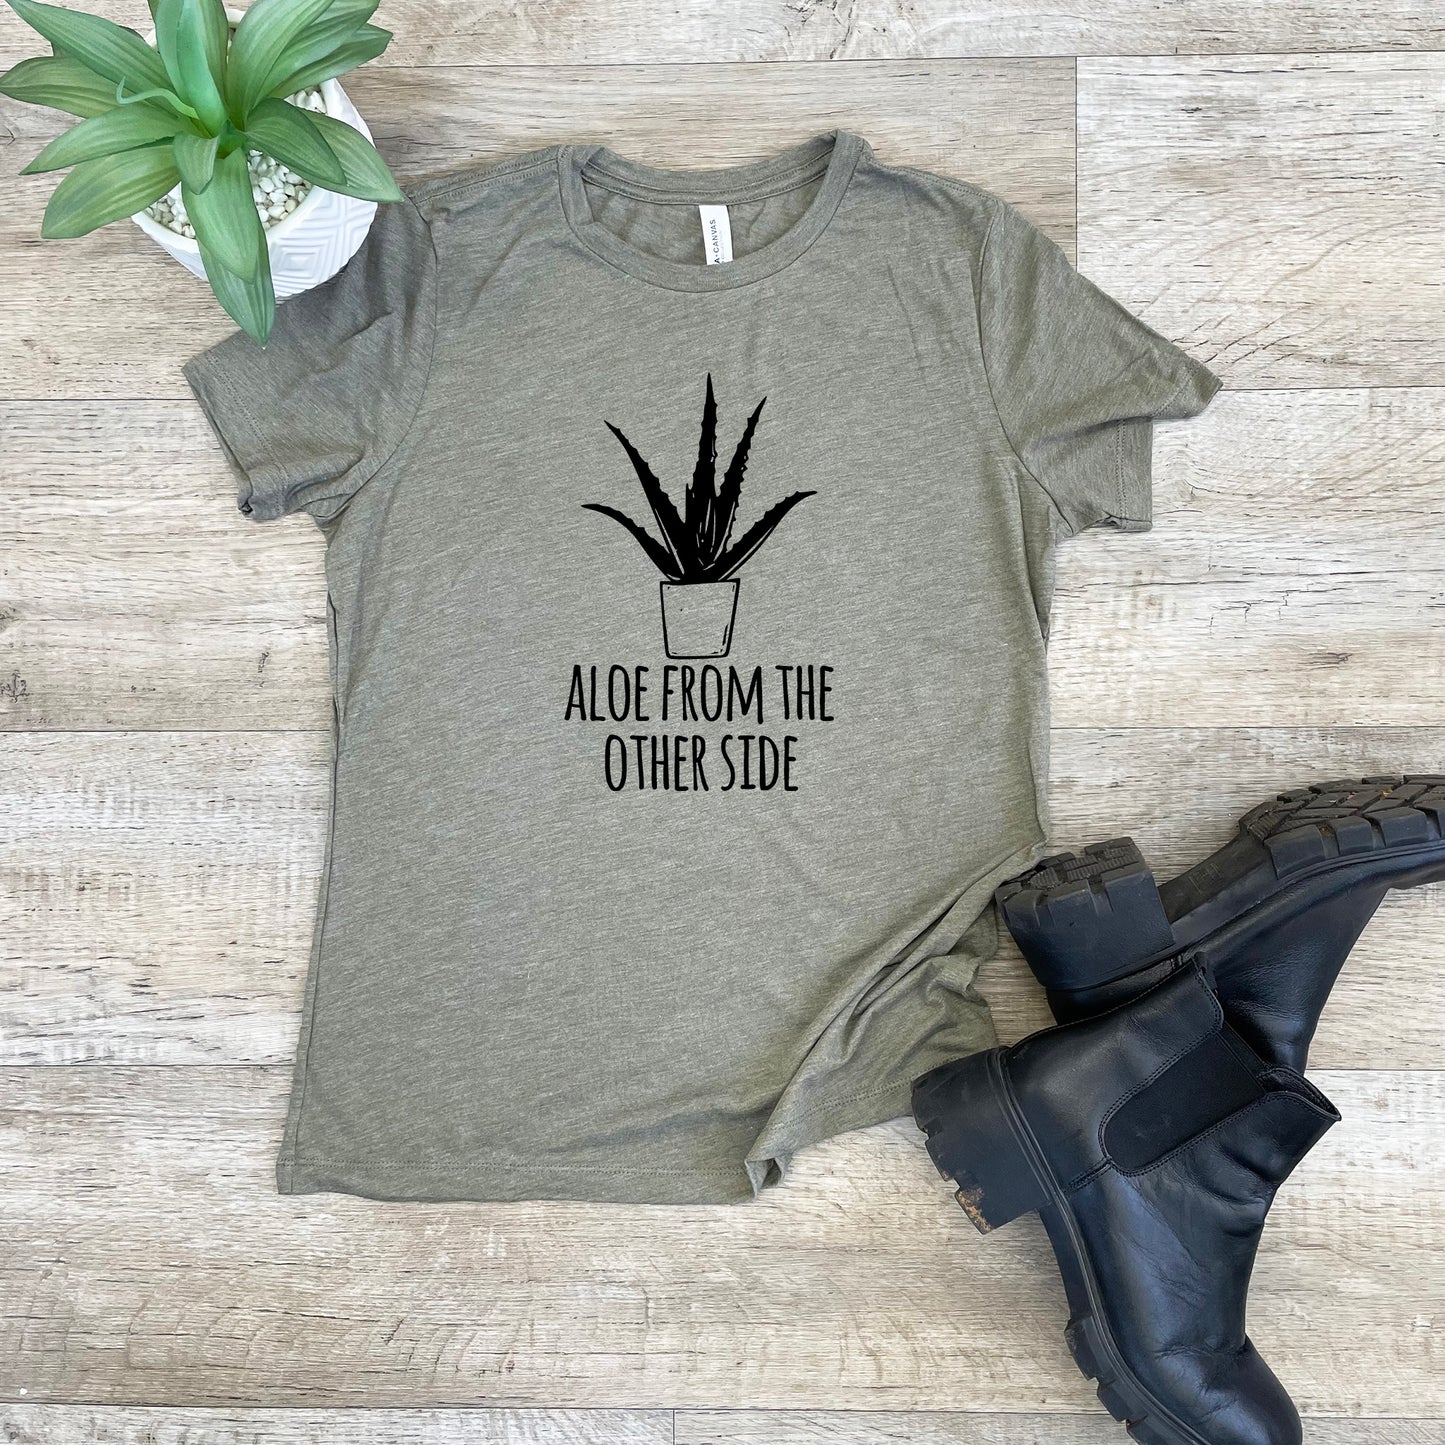 Aloe From The Other Side - Women's Crew Tee - Olive or Dusty Blue